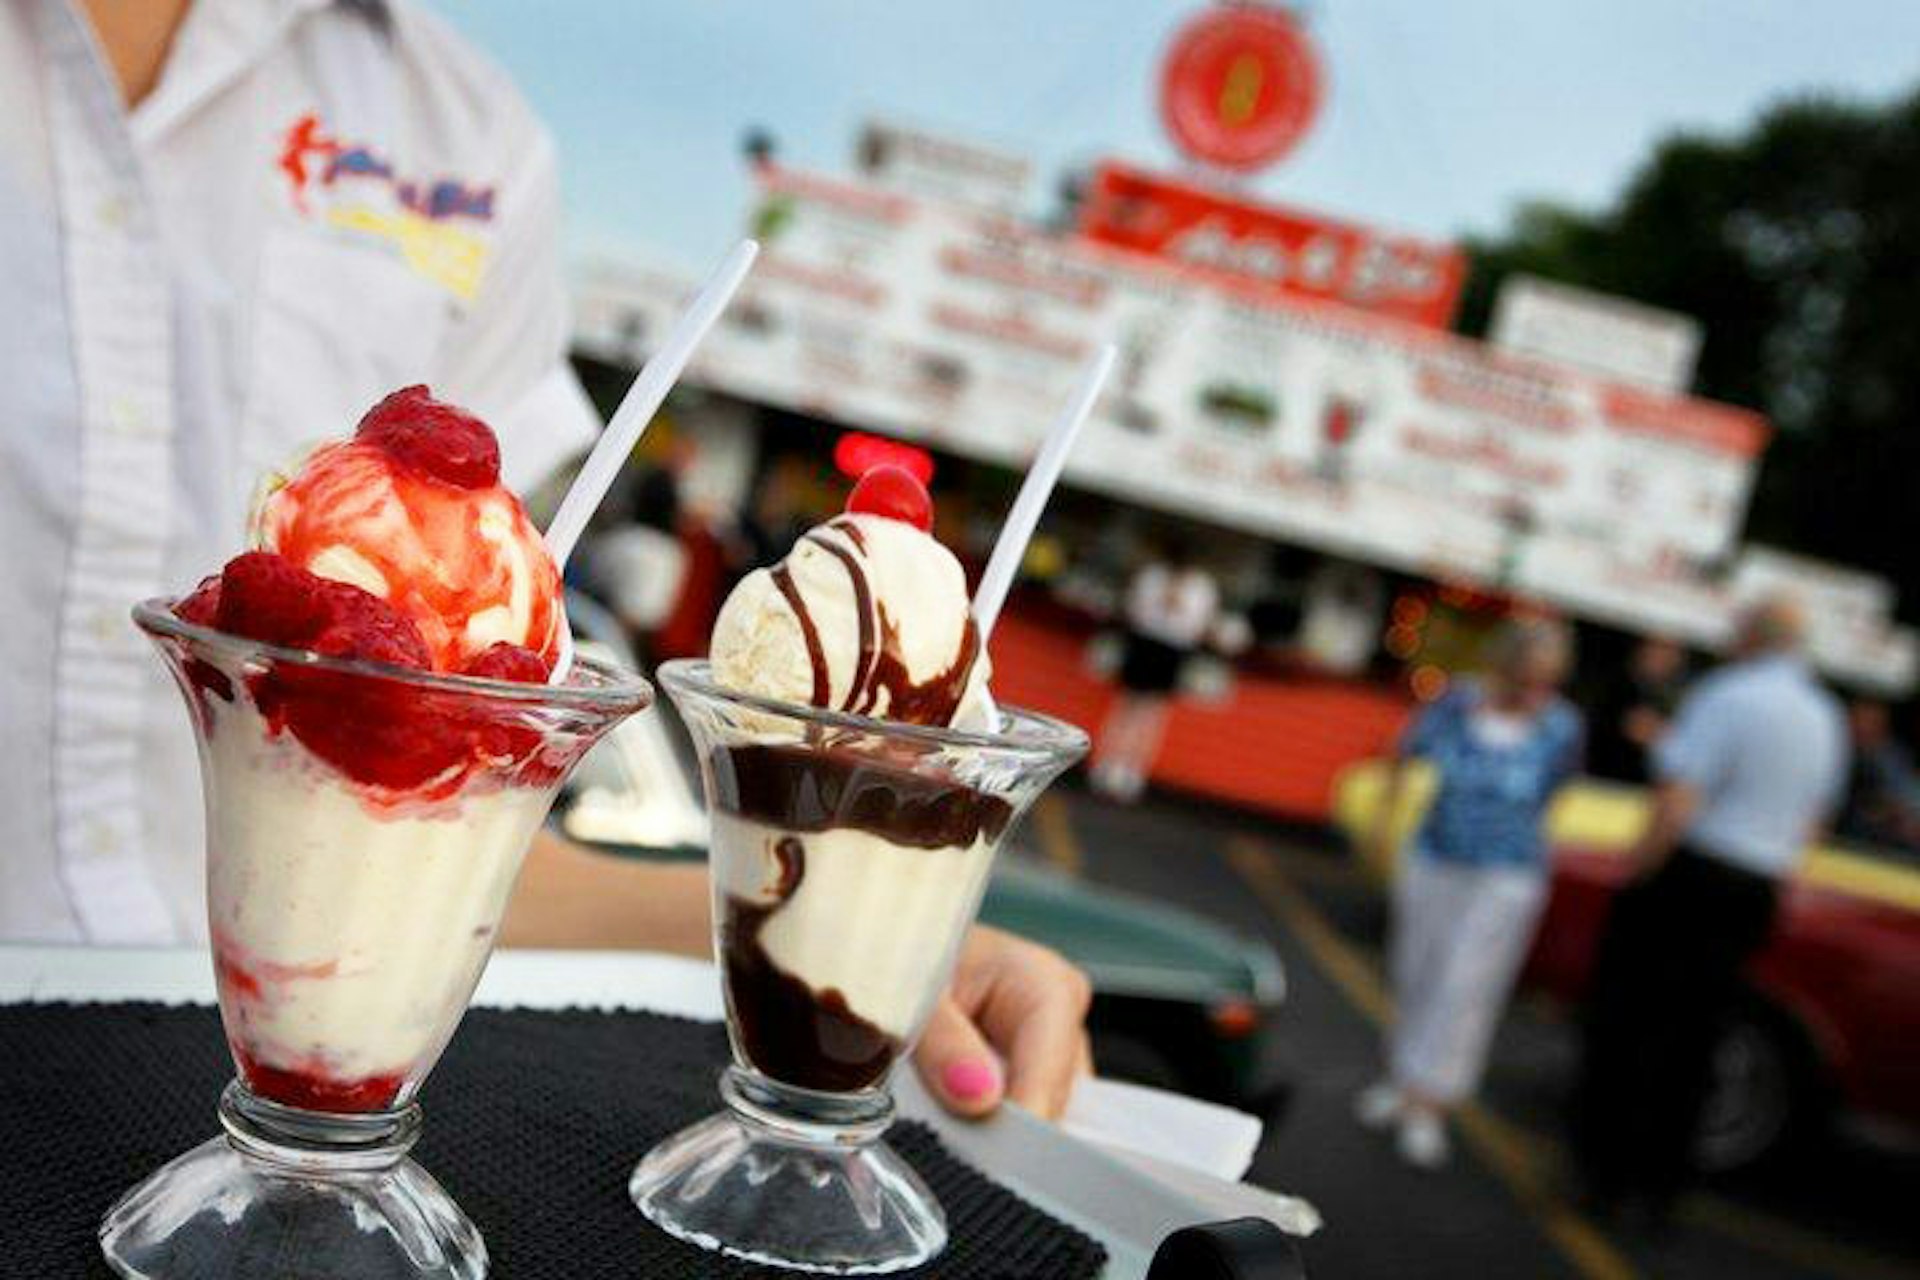 Close up of a pair of sundaes being held on a tray